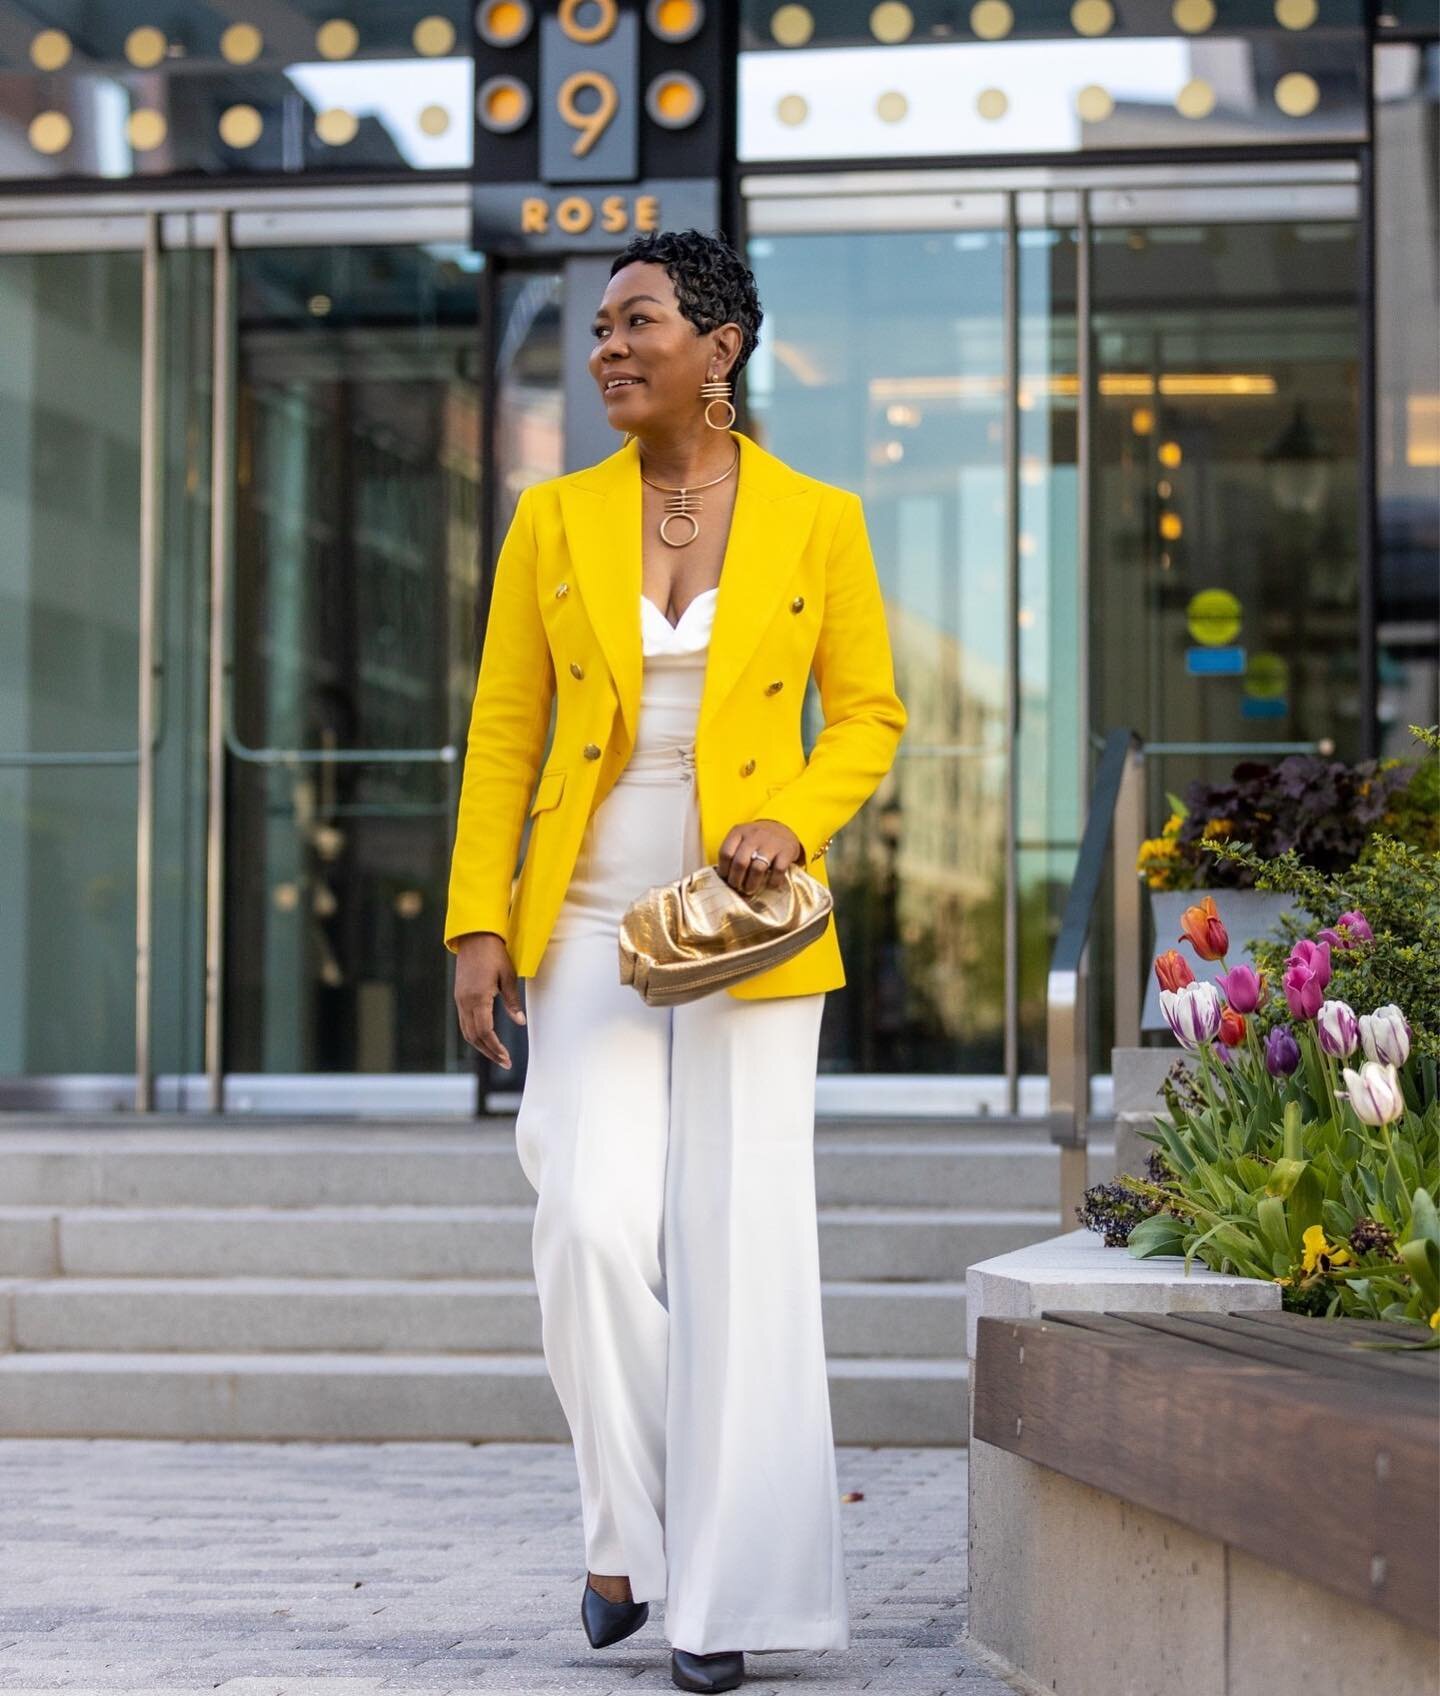 Who says professional attire has to be dull and boring? I'm bringing the sunshine to the office with this yellow blazer! ☀️ #BrightBlazer #ProfessionalStyle #OfficeOutfit

Follow my shop @IAMELITTLE on the @shop.LTK app to shop this post and get my e